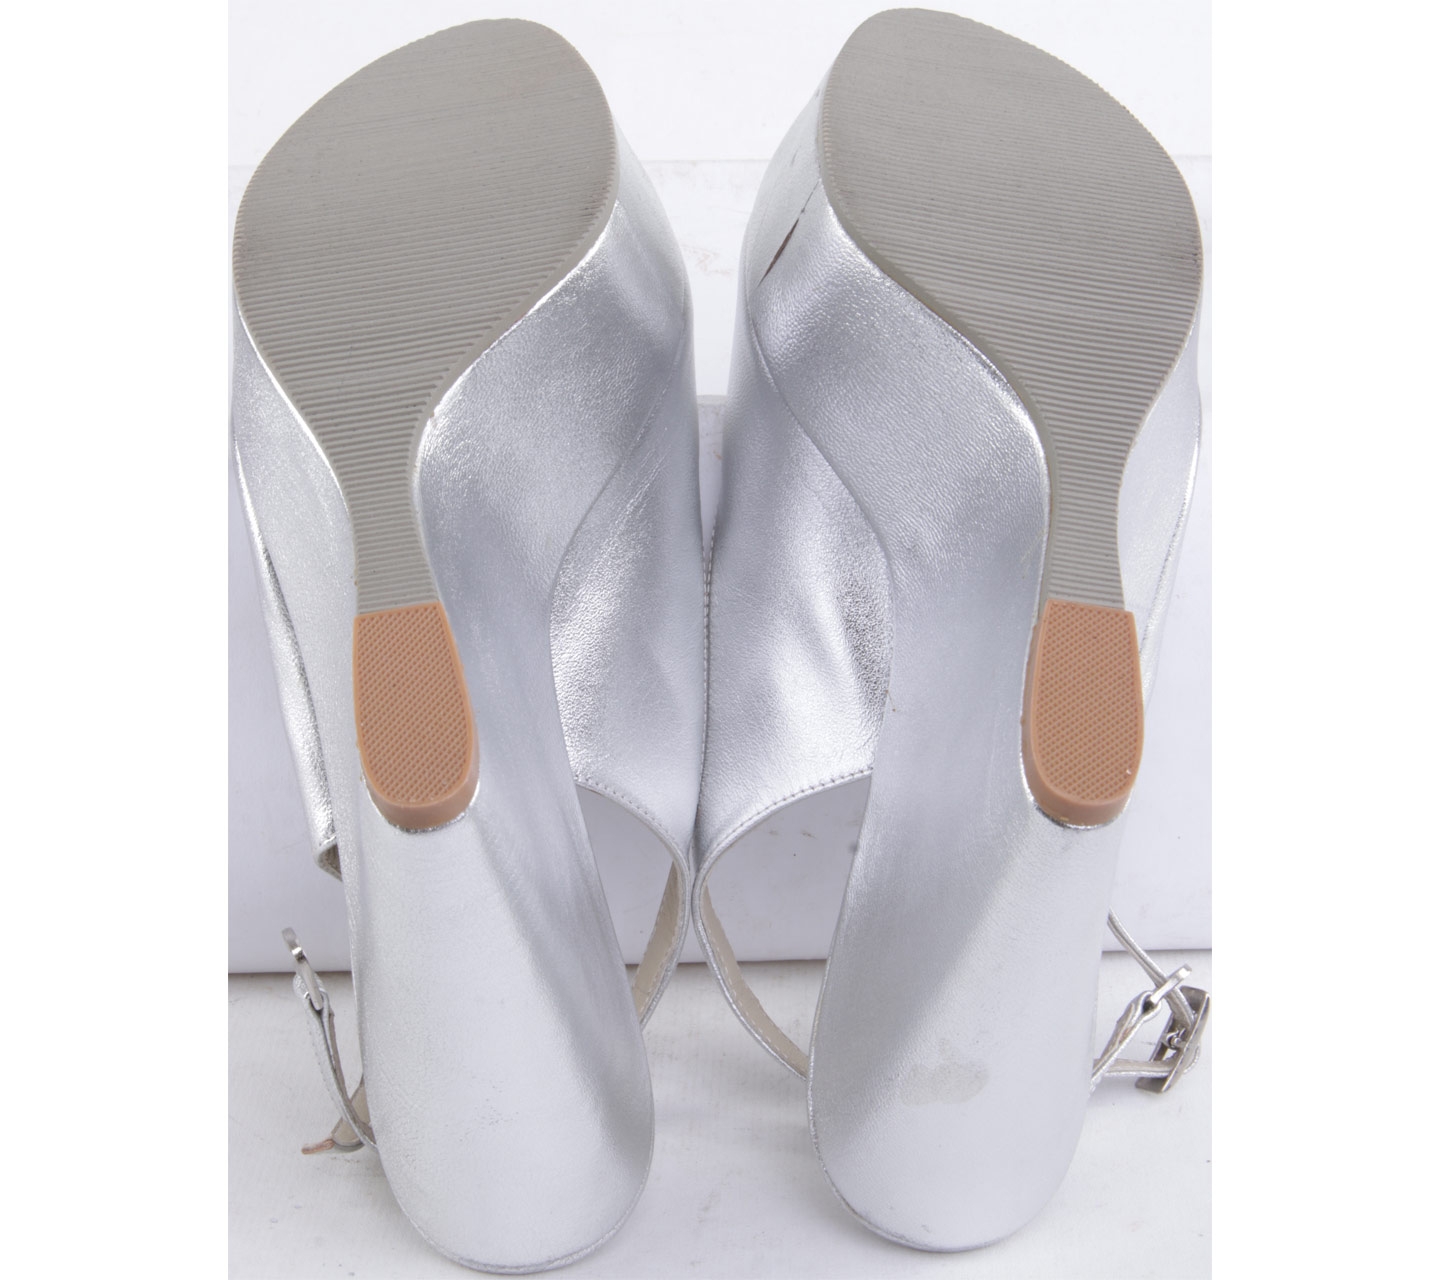 Andre Valentino Silver Wedges